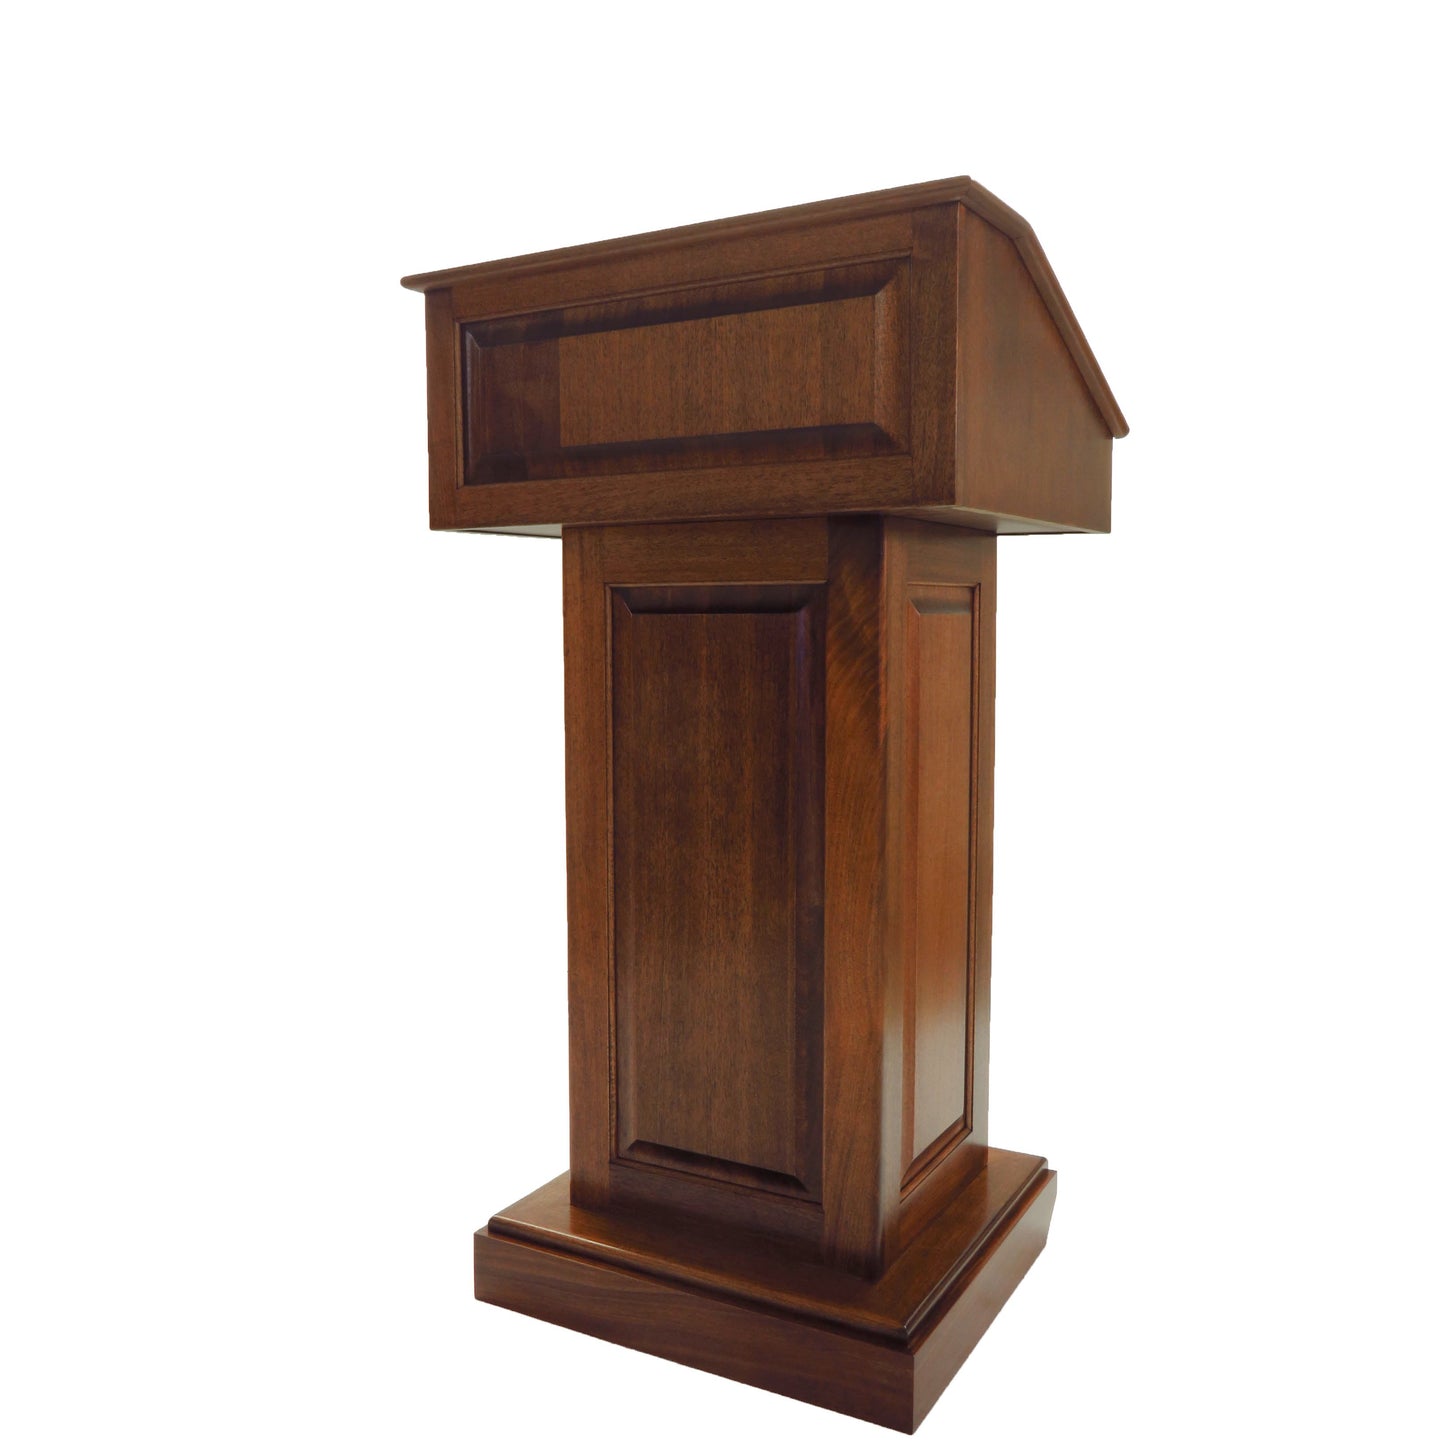 The Counselor Wood Lectern